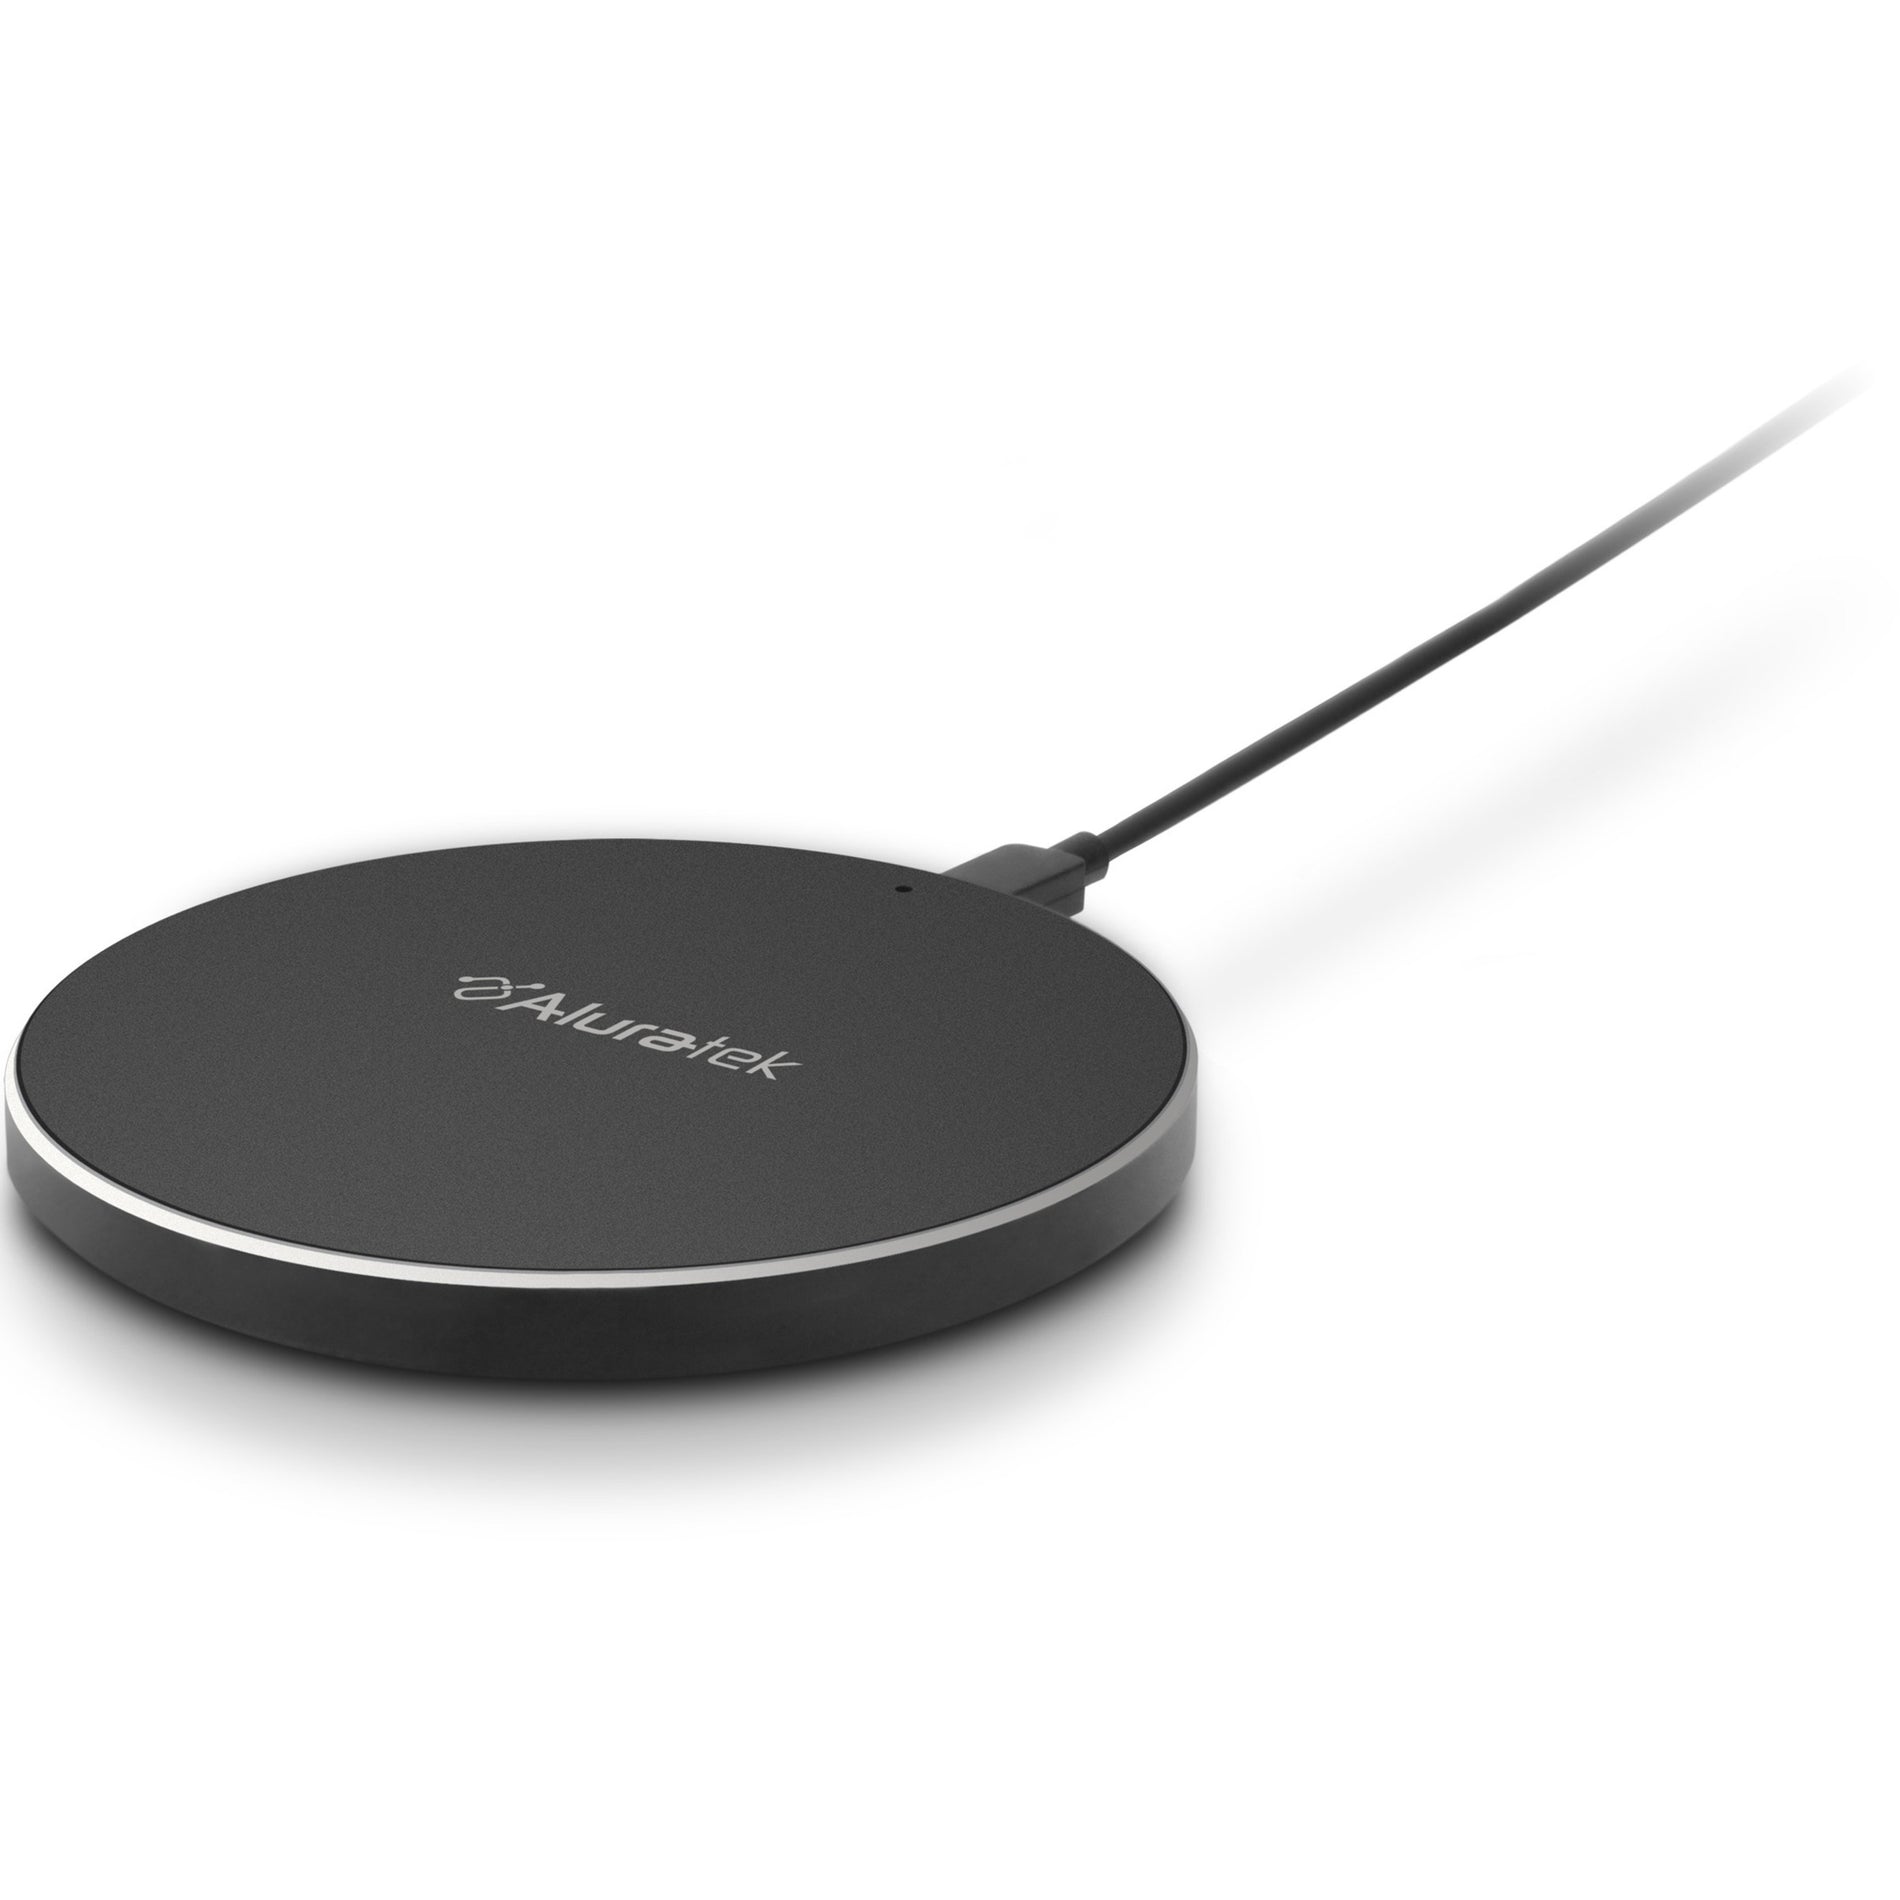 Aluratek AQC10F Qi Wireless Charging Pad, 5V DC Input Voltage, USB Cable Included